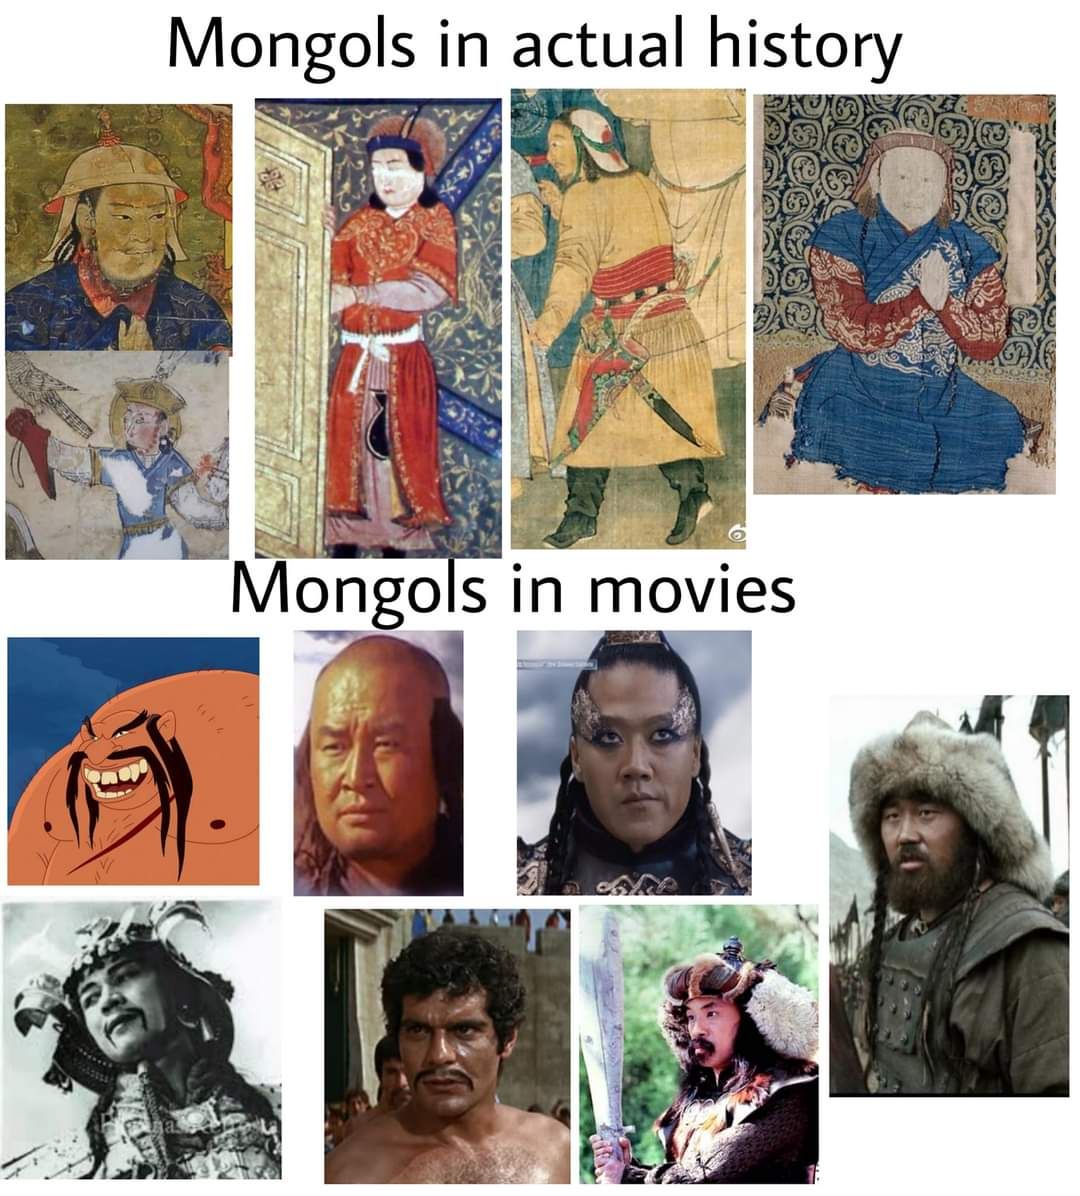 Filmmakers trying to do justice medieval Mongol